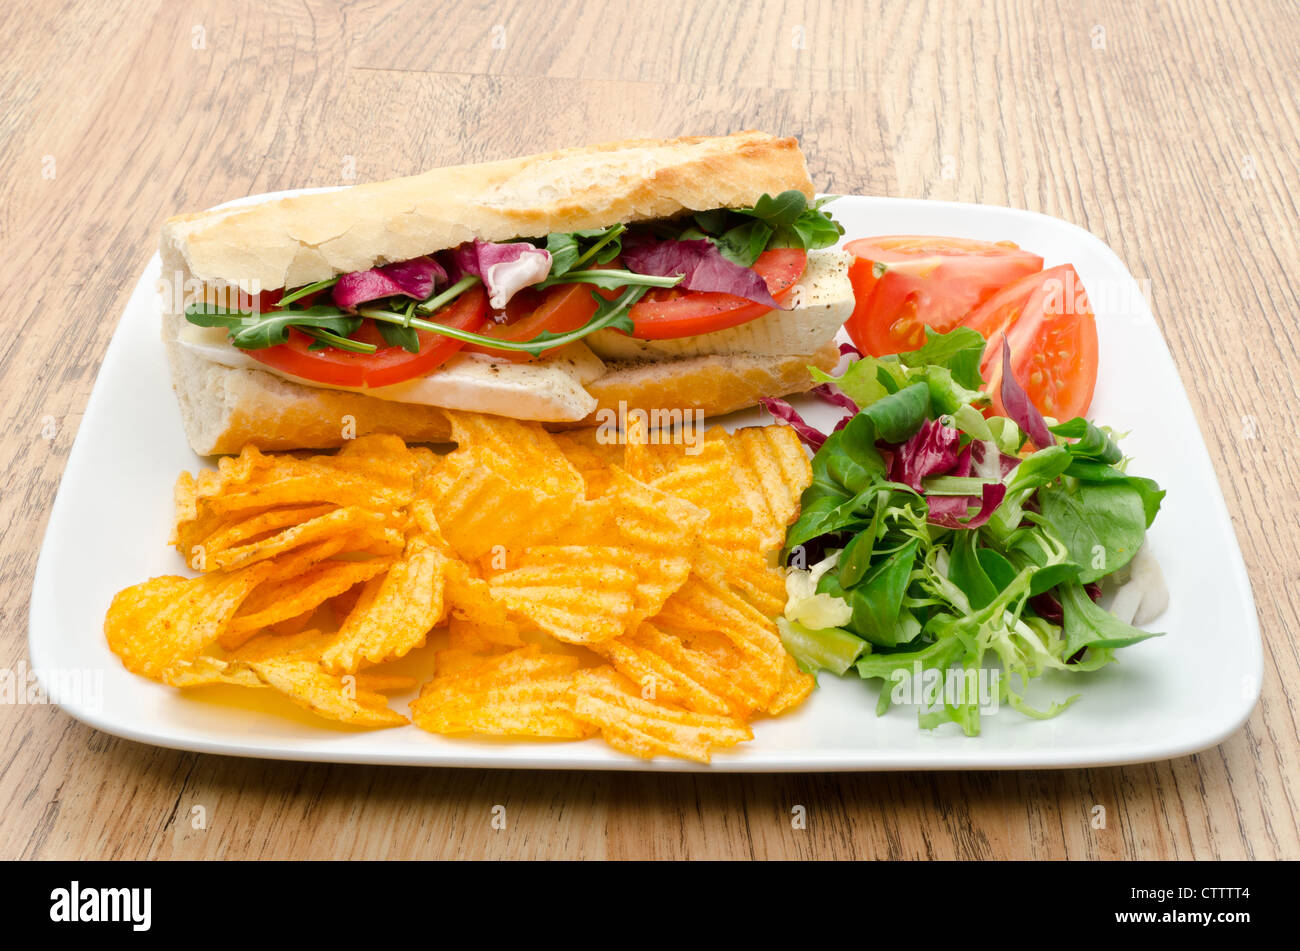 Baguette filled with Brie cheese served with salad and flavoured chips - studio shot Stock Photo